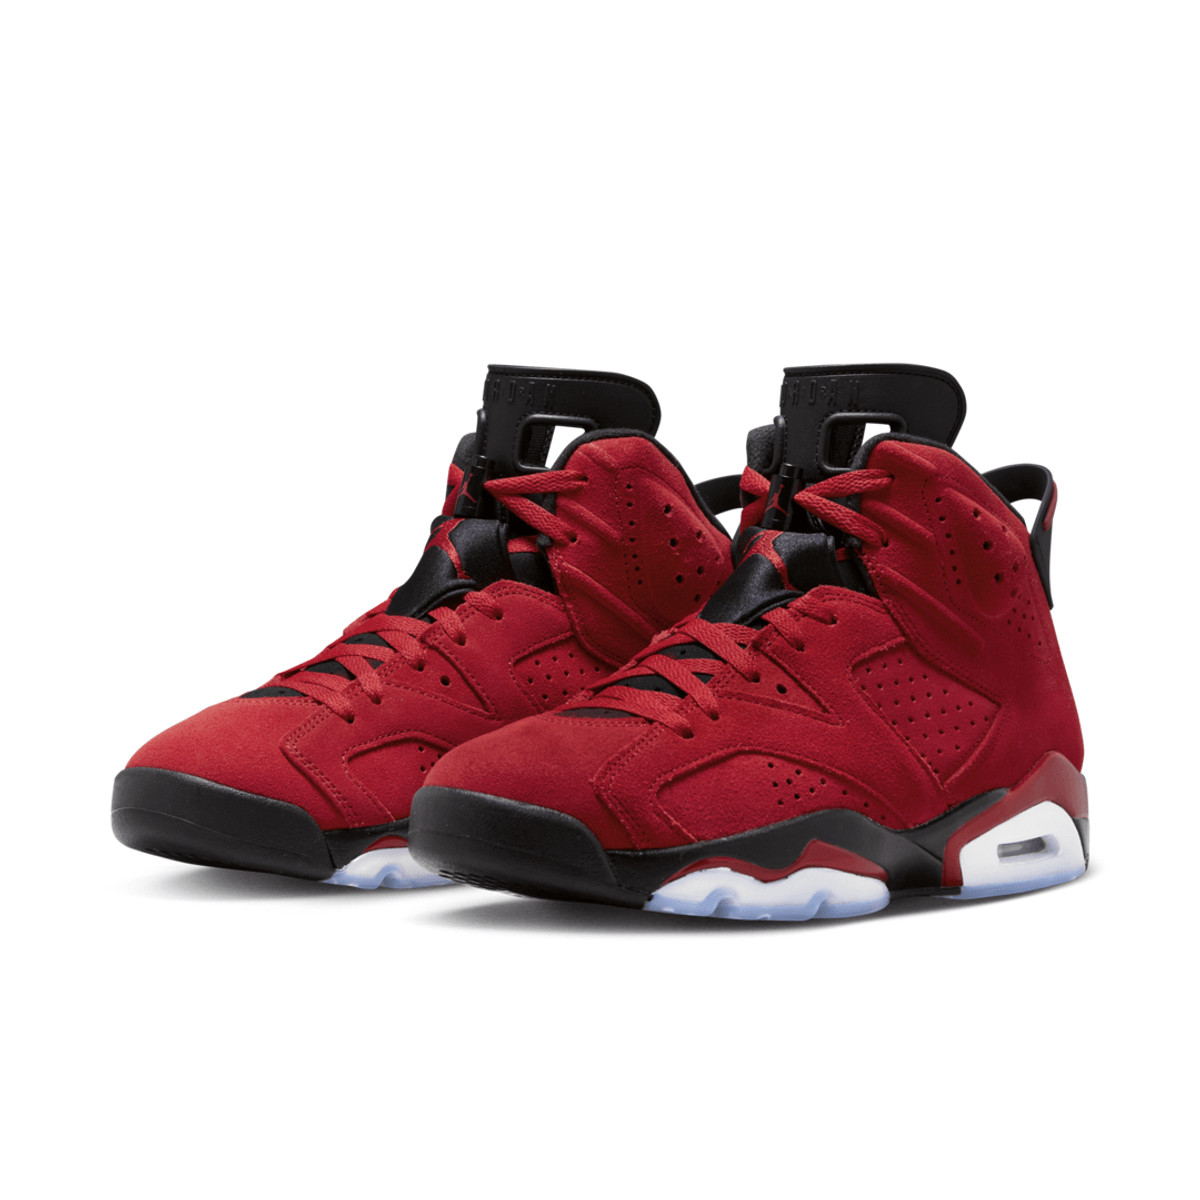 Everything We Know About The Air Jordan 6 Toro Bravo Release